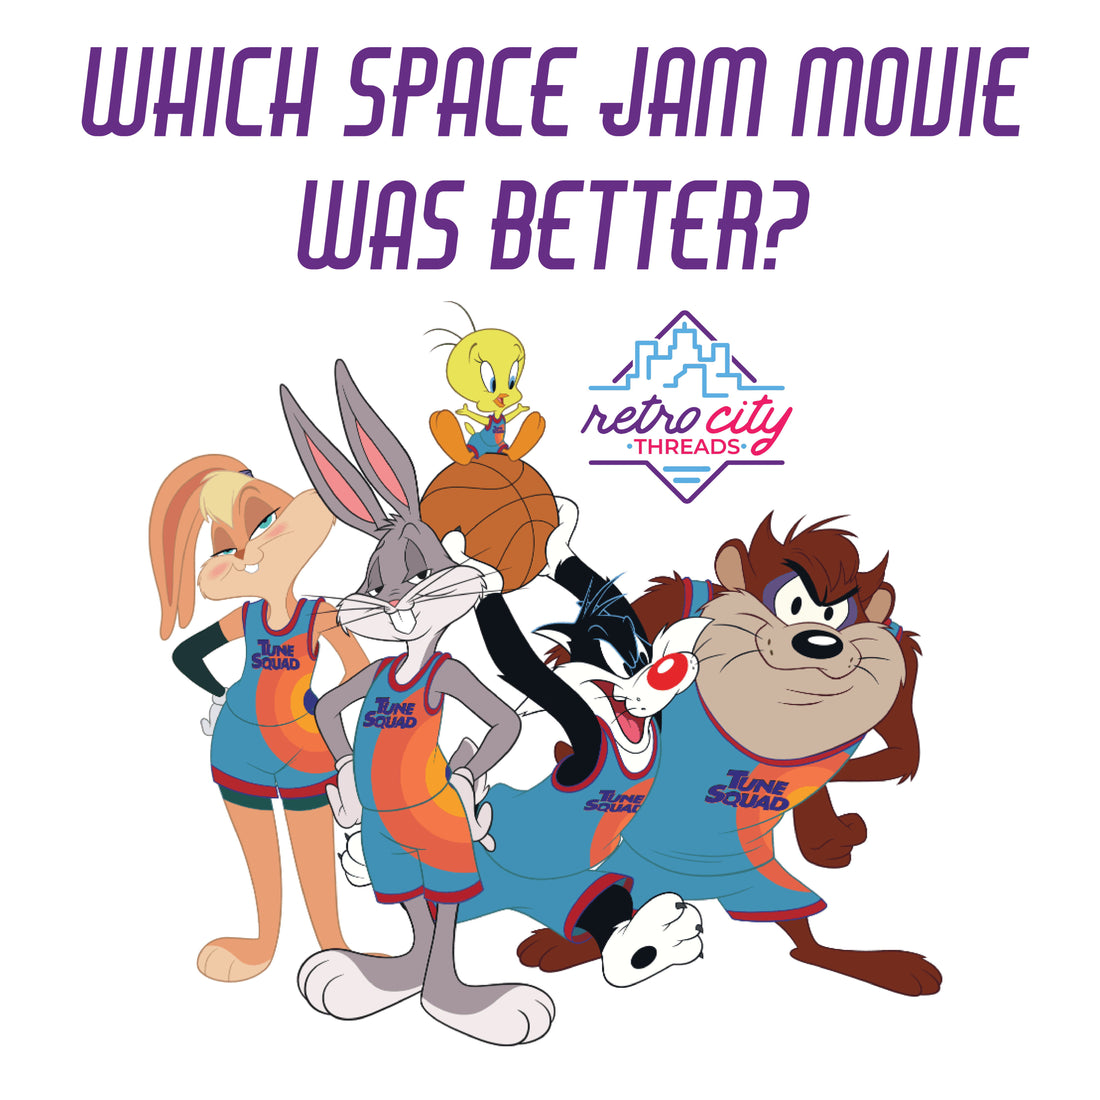 Which Space Jam Movie Was Better?